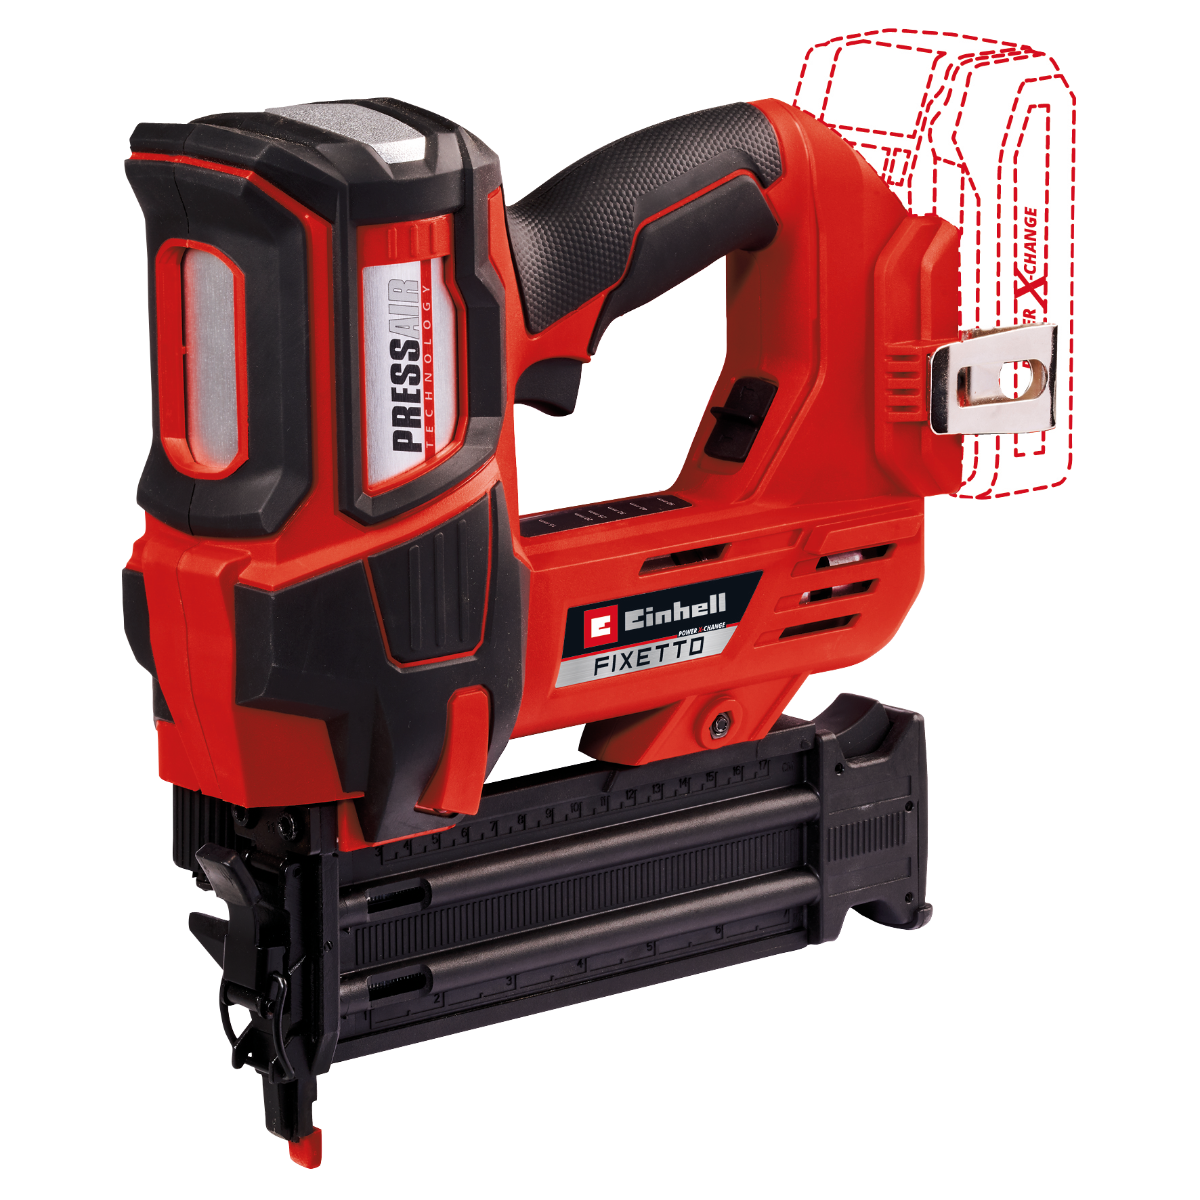 FIXETTO 18/50 N - 18V 18-Gauge Cordless Finish Nailer